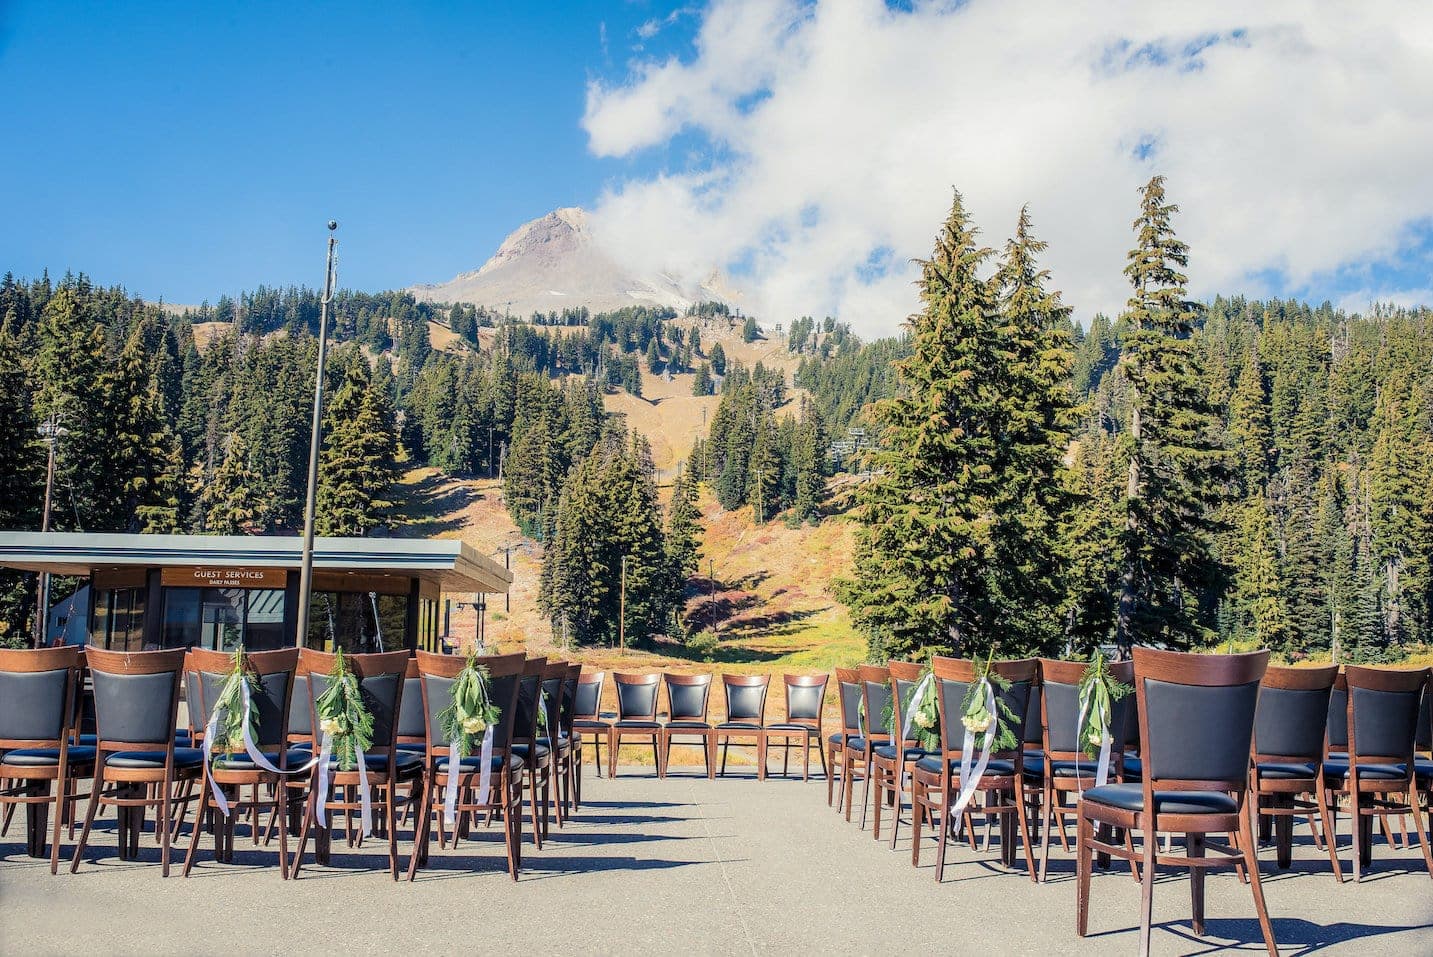 The outdoor Sahale wedding venue with Mt. Hood in the background.